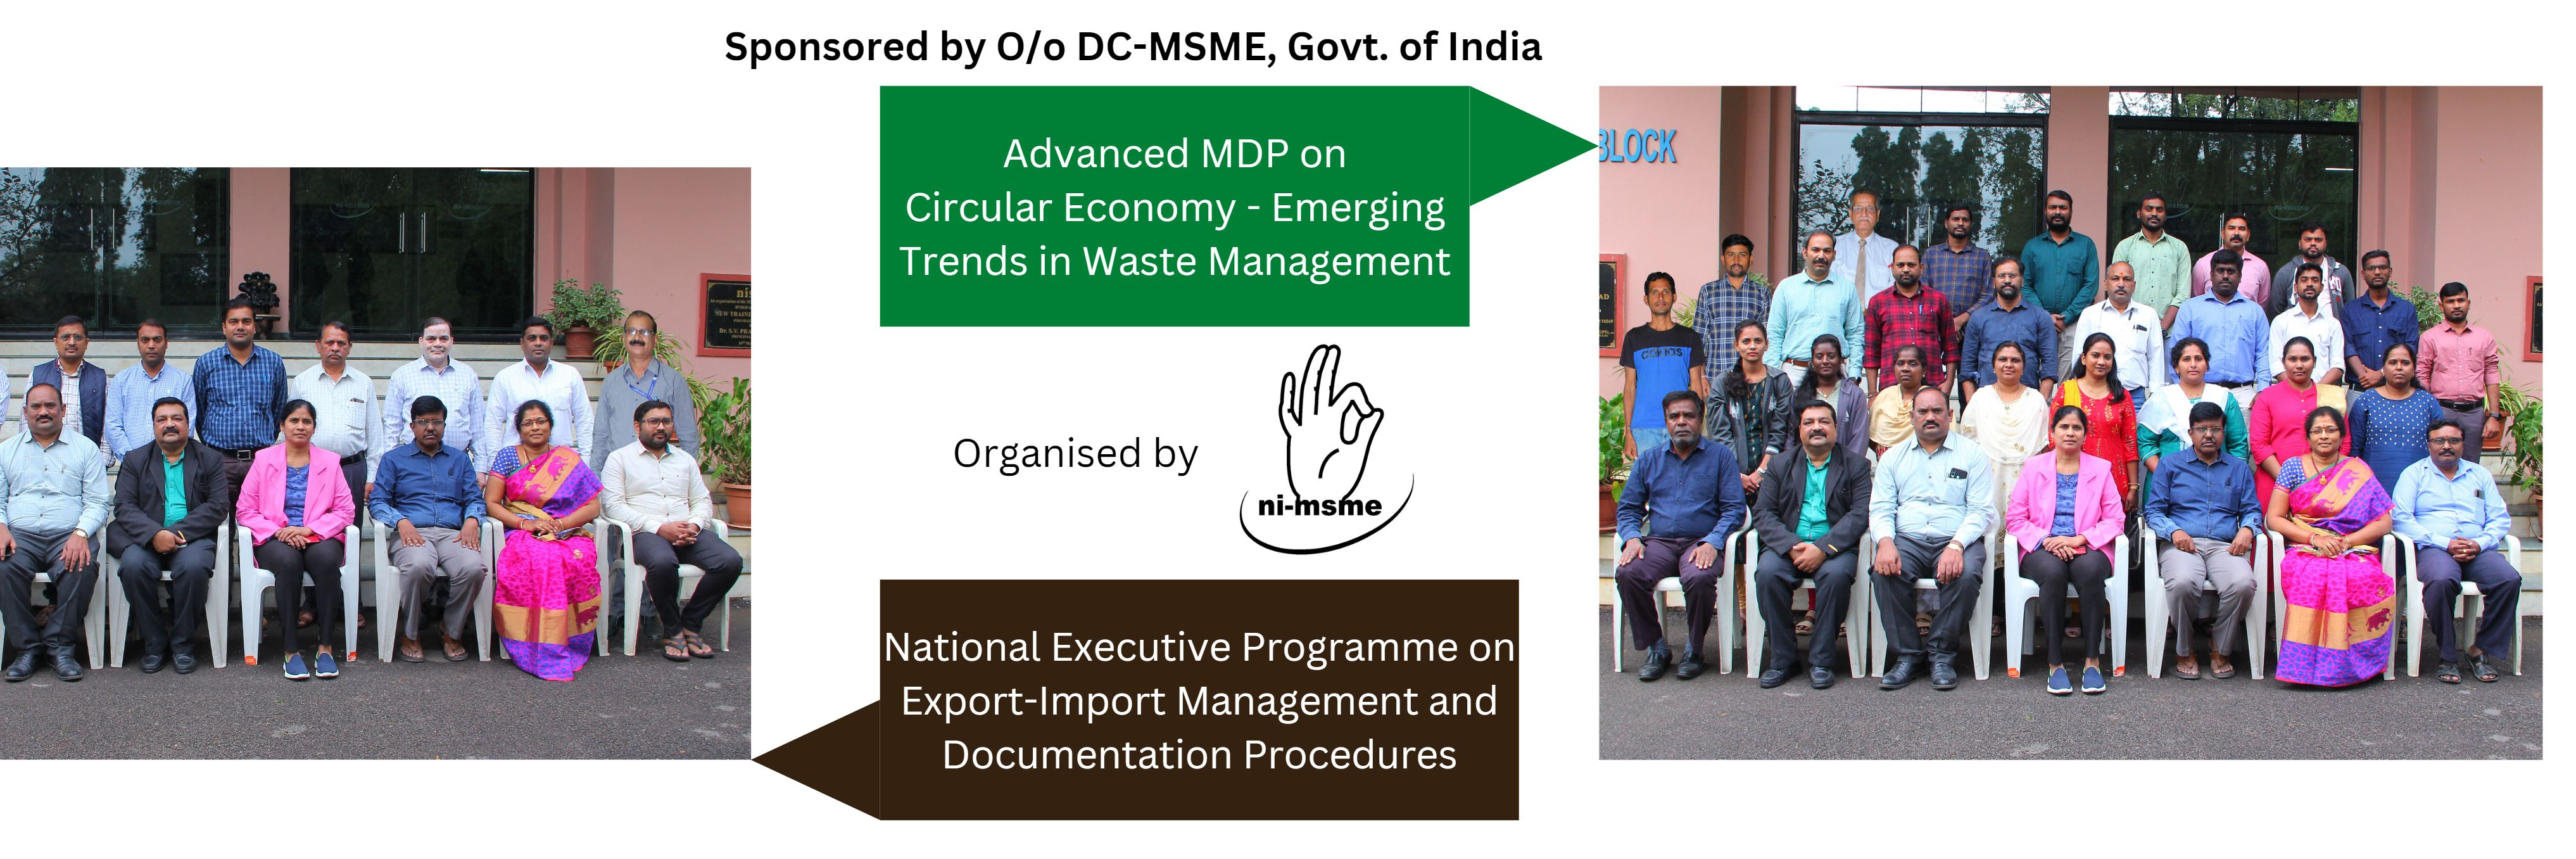 Advanced MDP on Circular Economy -Emerging Trends in Waste Management